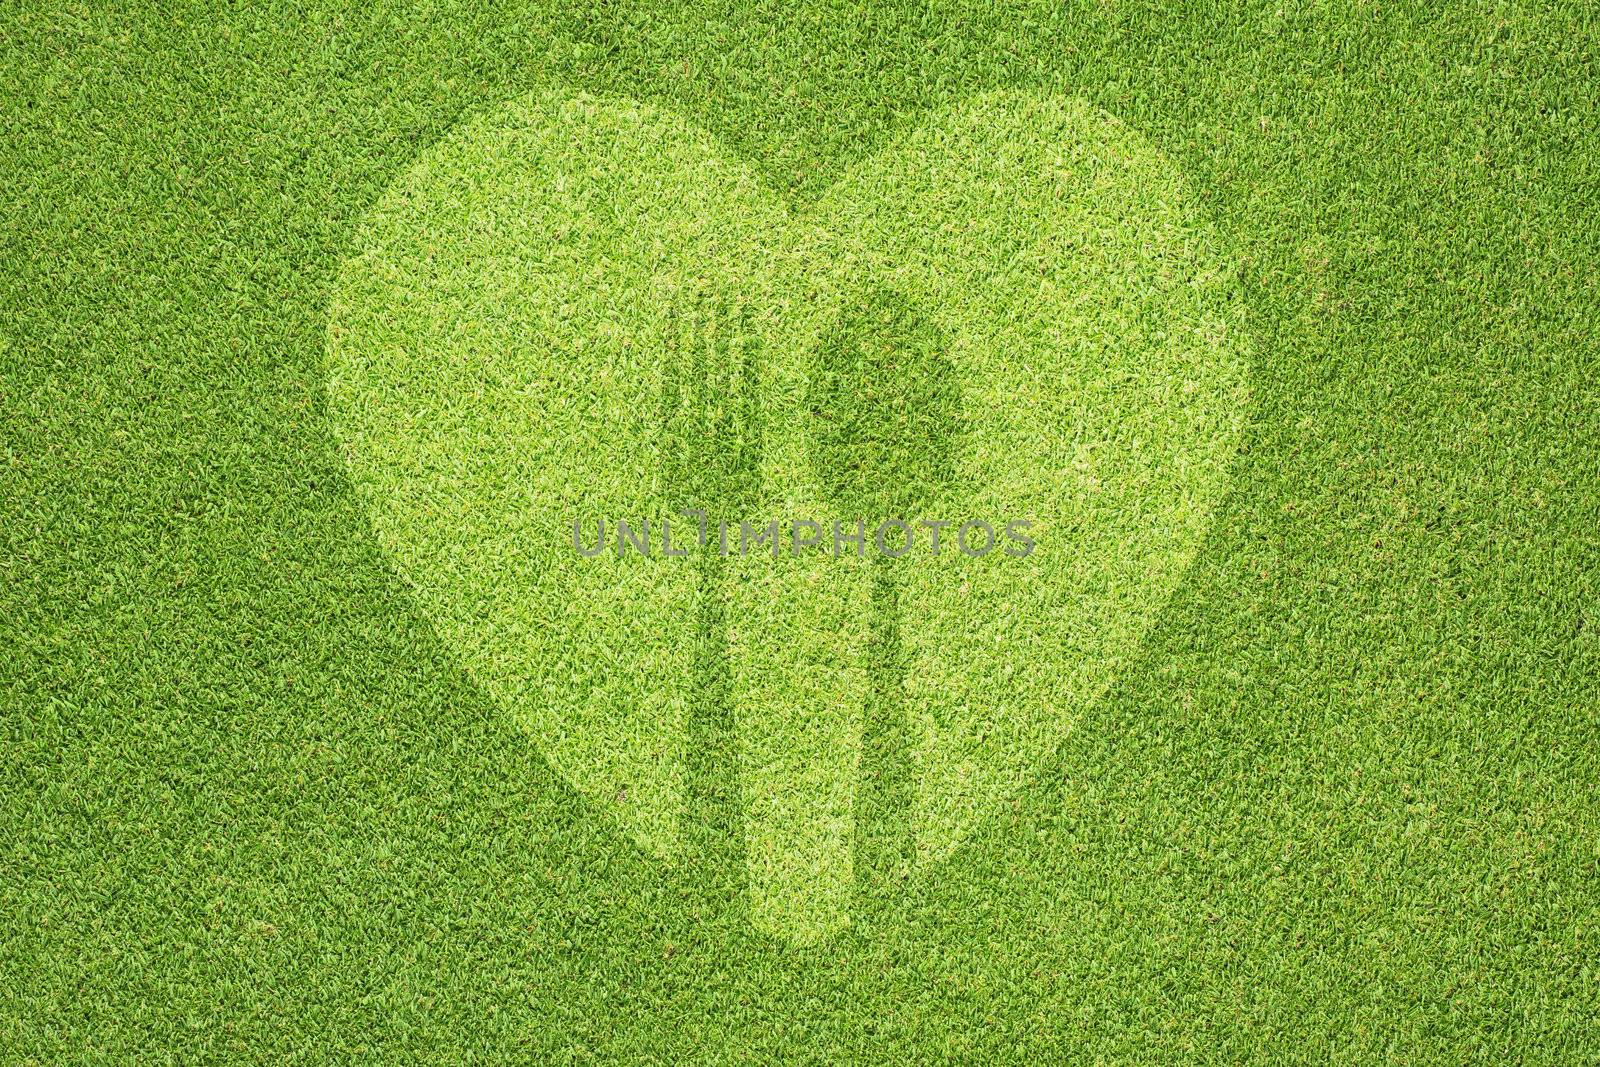 Spoon with heart icon on green grass texture and background